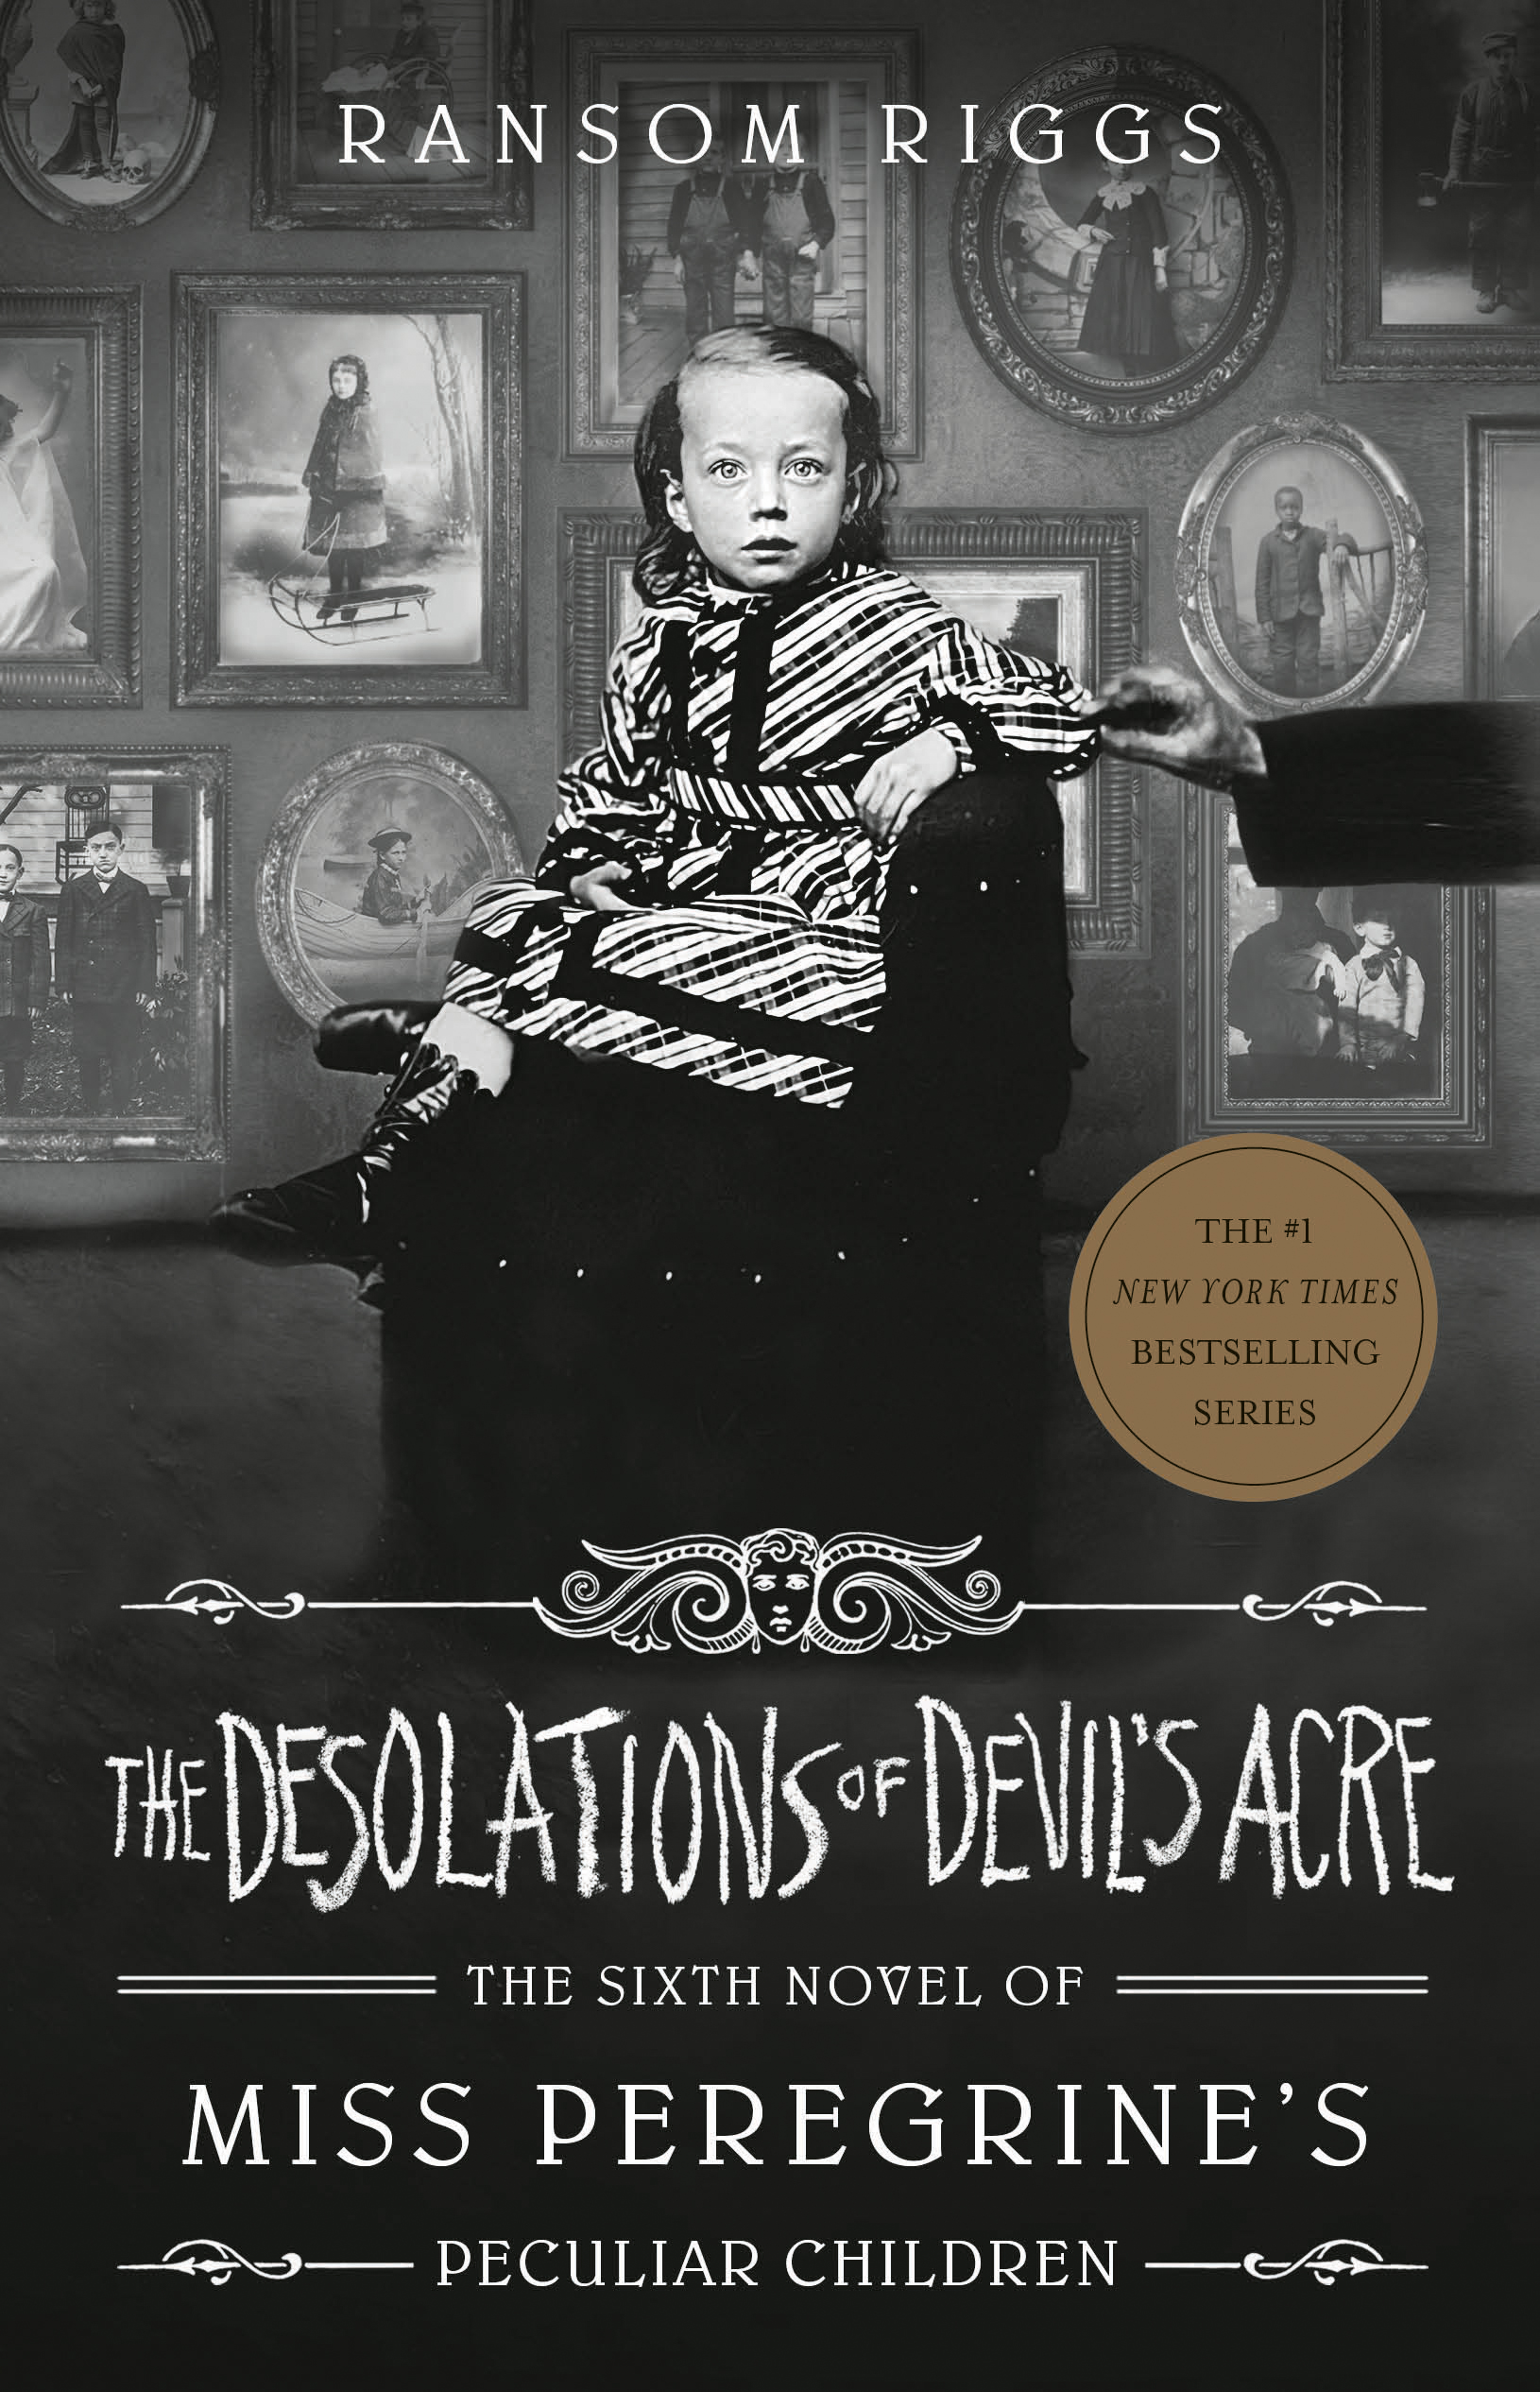 The Desolations of Devil's Acre By Ransom Riggs